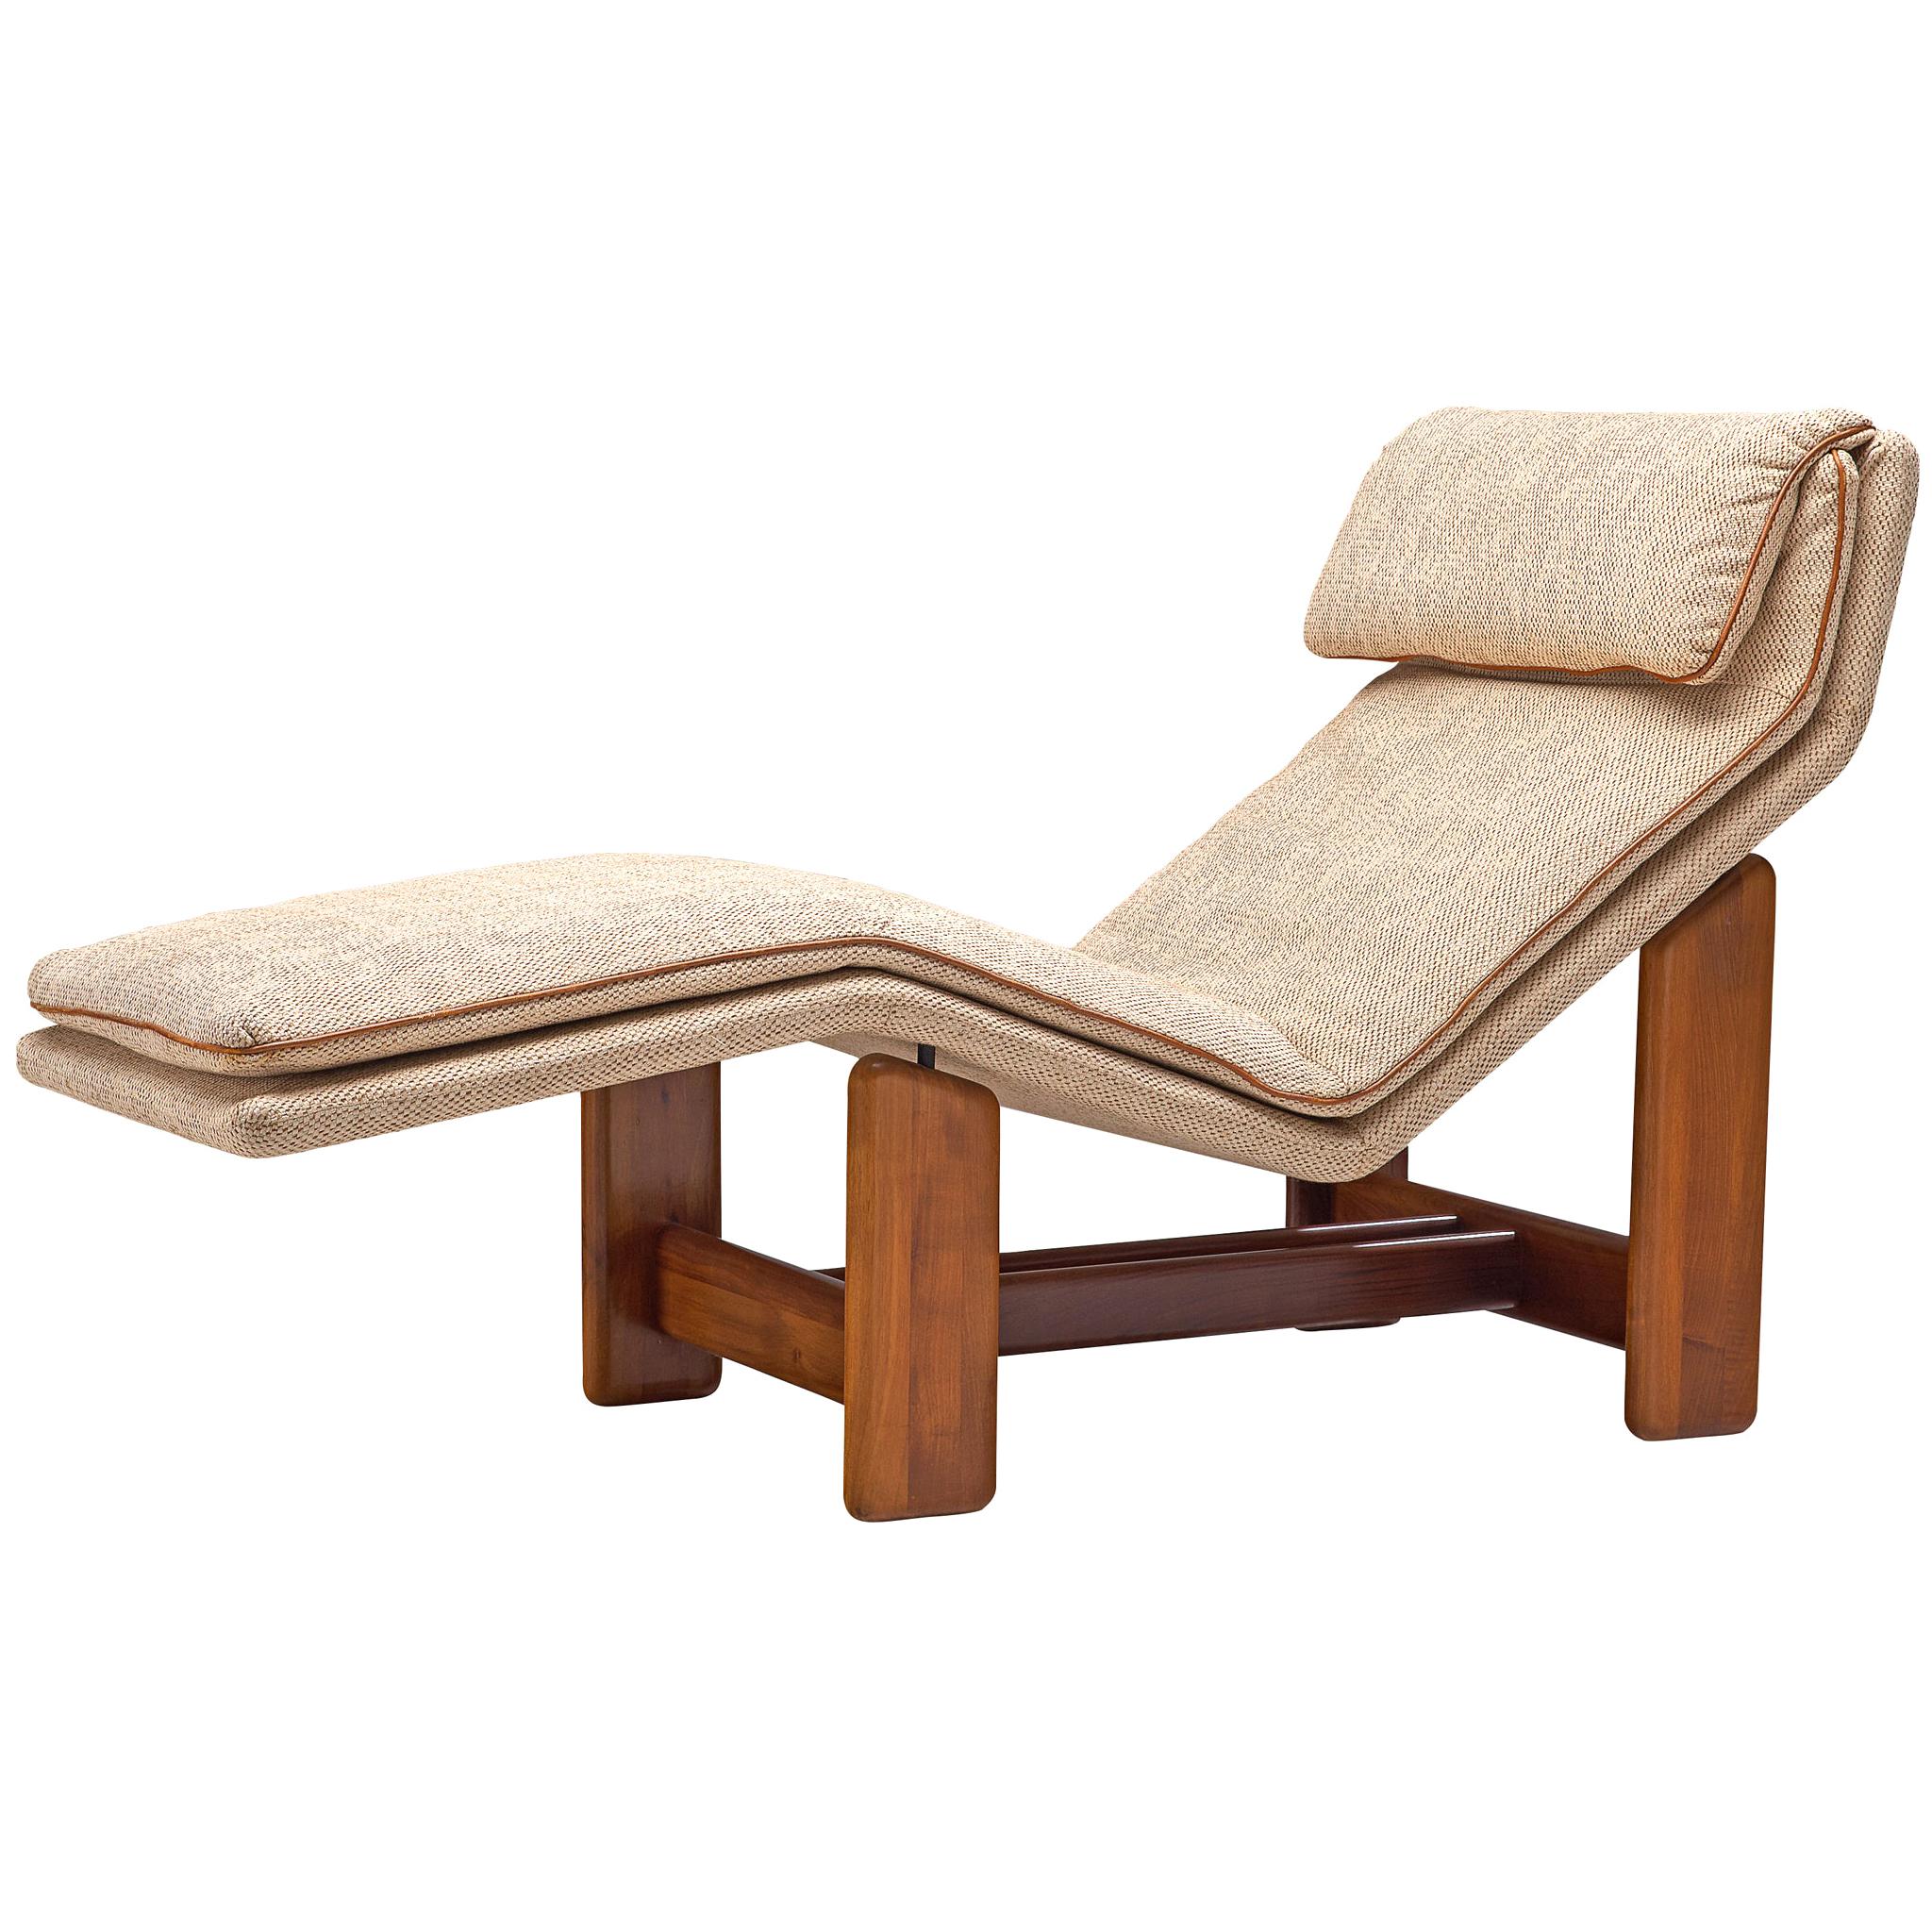 Italian Chaise Longue in Beige Fabric and Walnut by Mobil Girgi